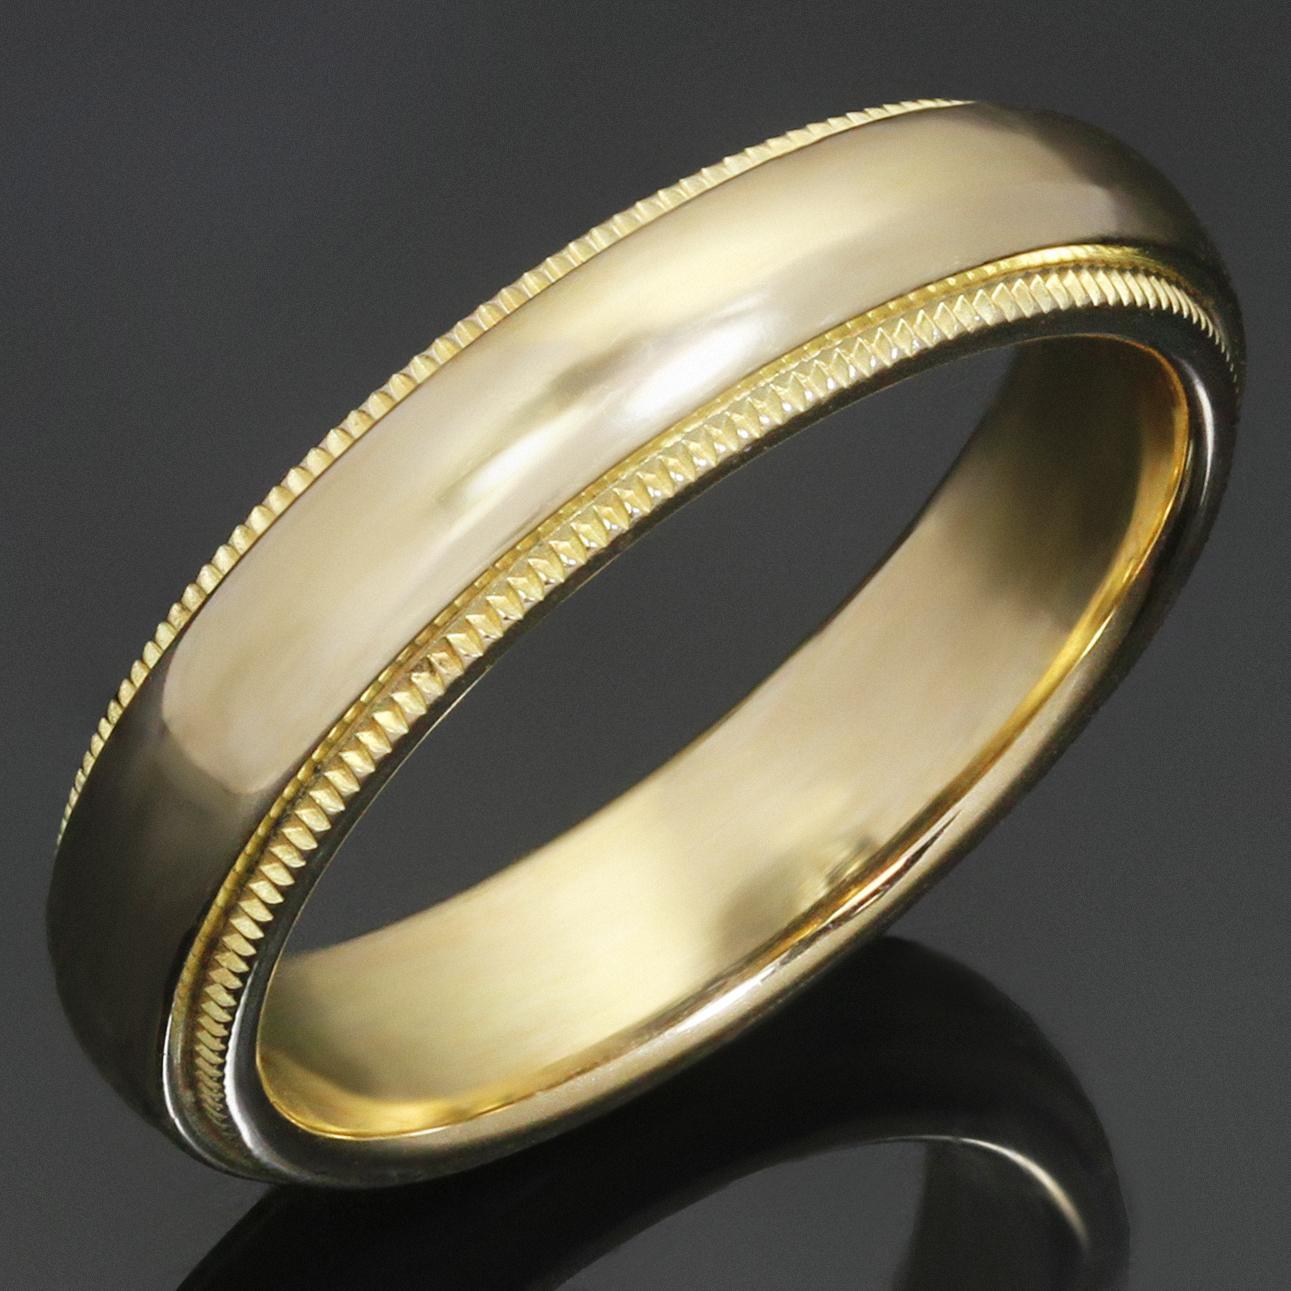 This timeless Tiffany wedding band ring features a classic milgrain design crafted in 18k yellow gold. Made in United States circa 2000s. Measurements: 0.15